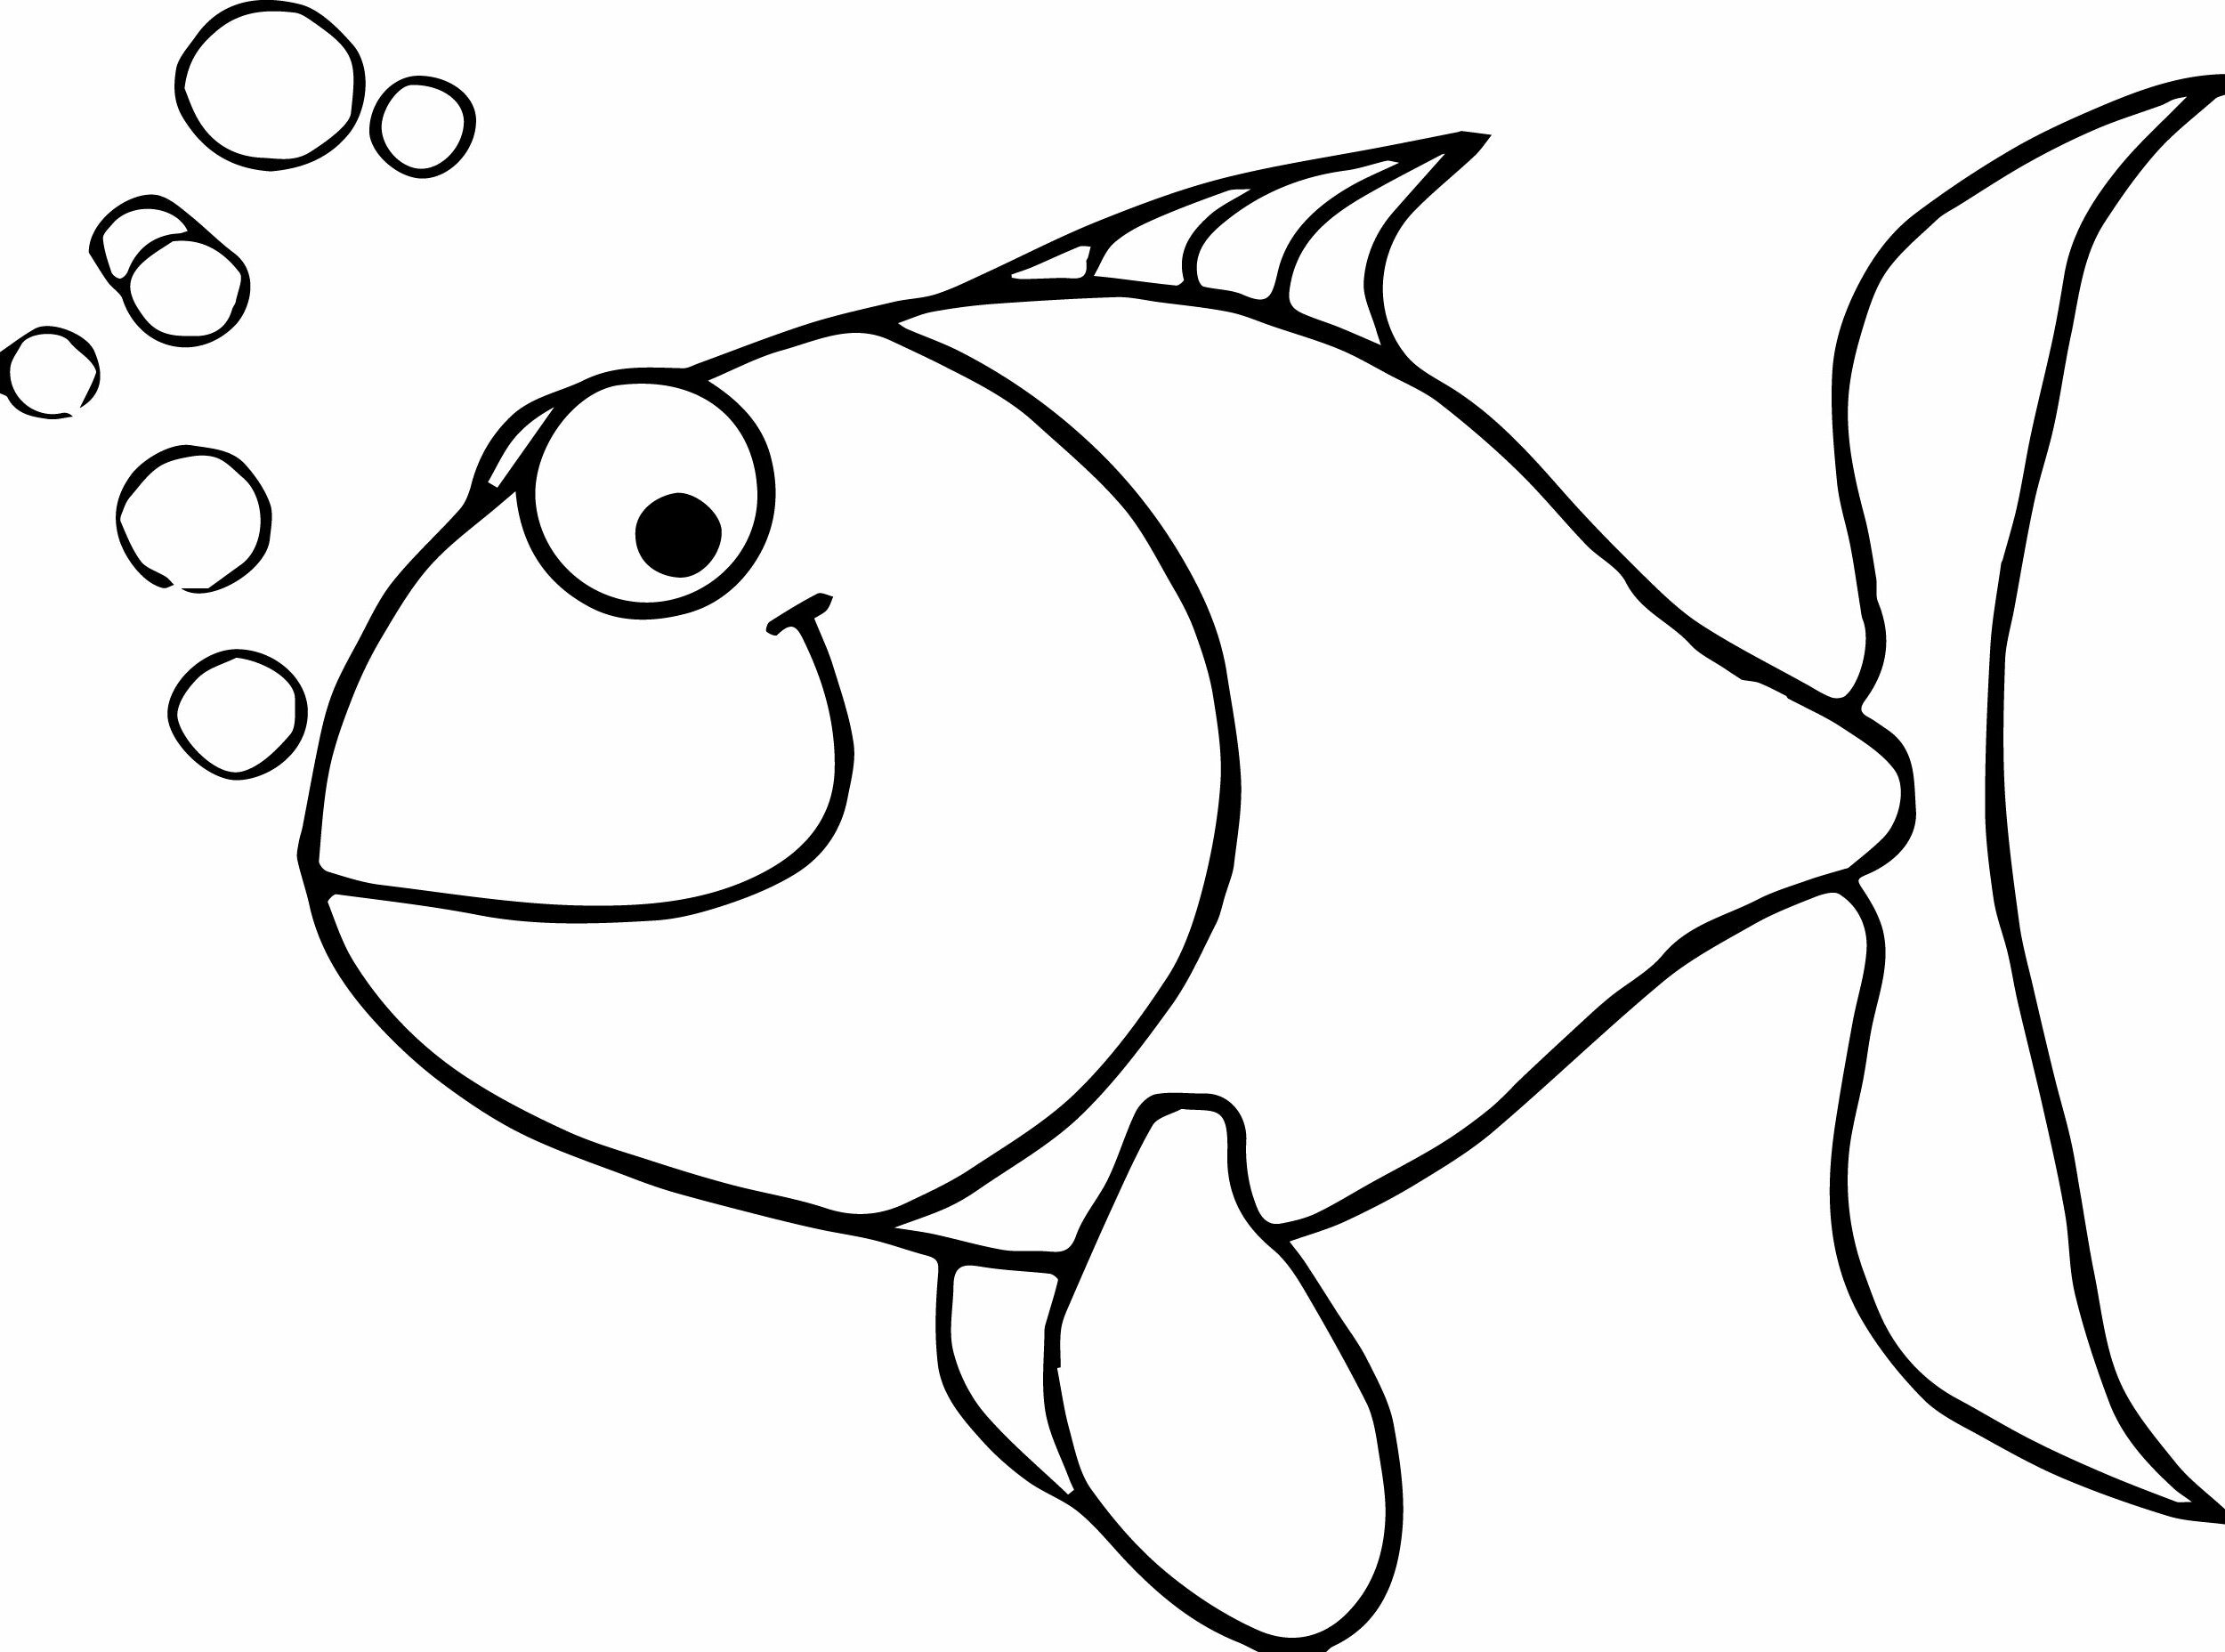 Fish Coloring Pages | Wecoloringpage